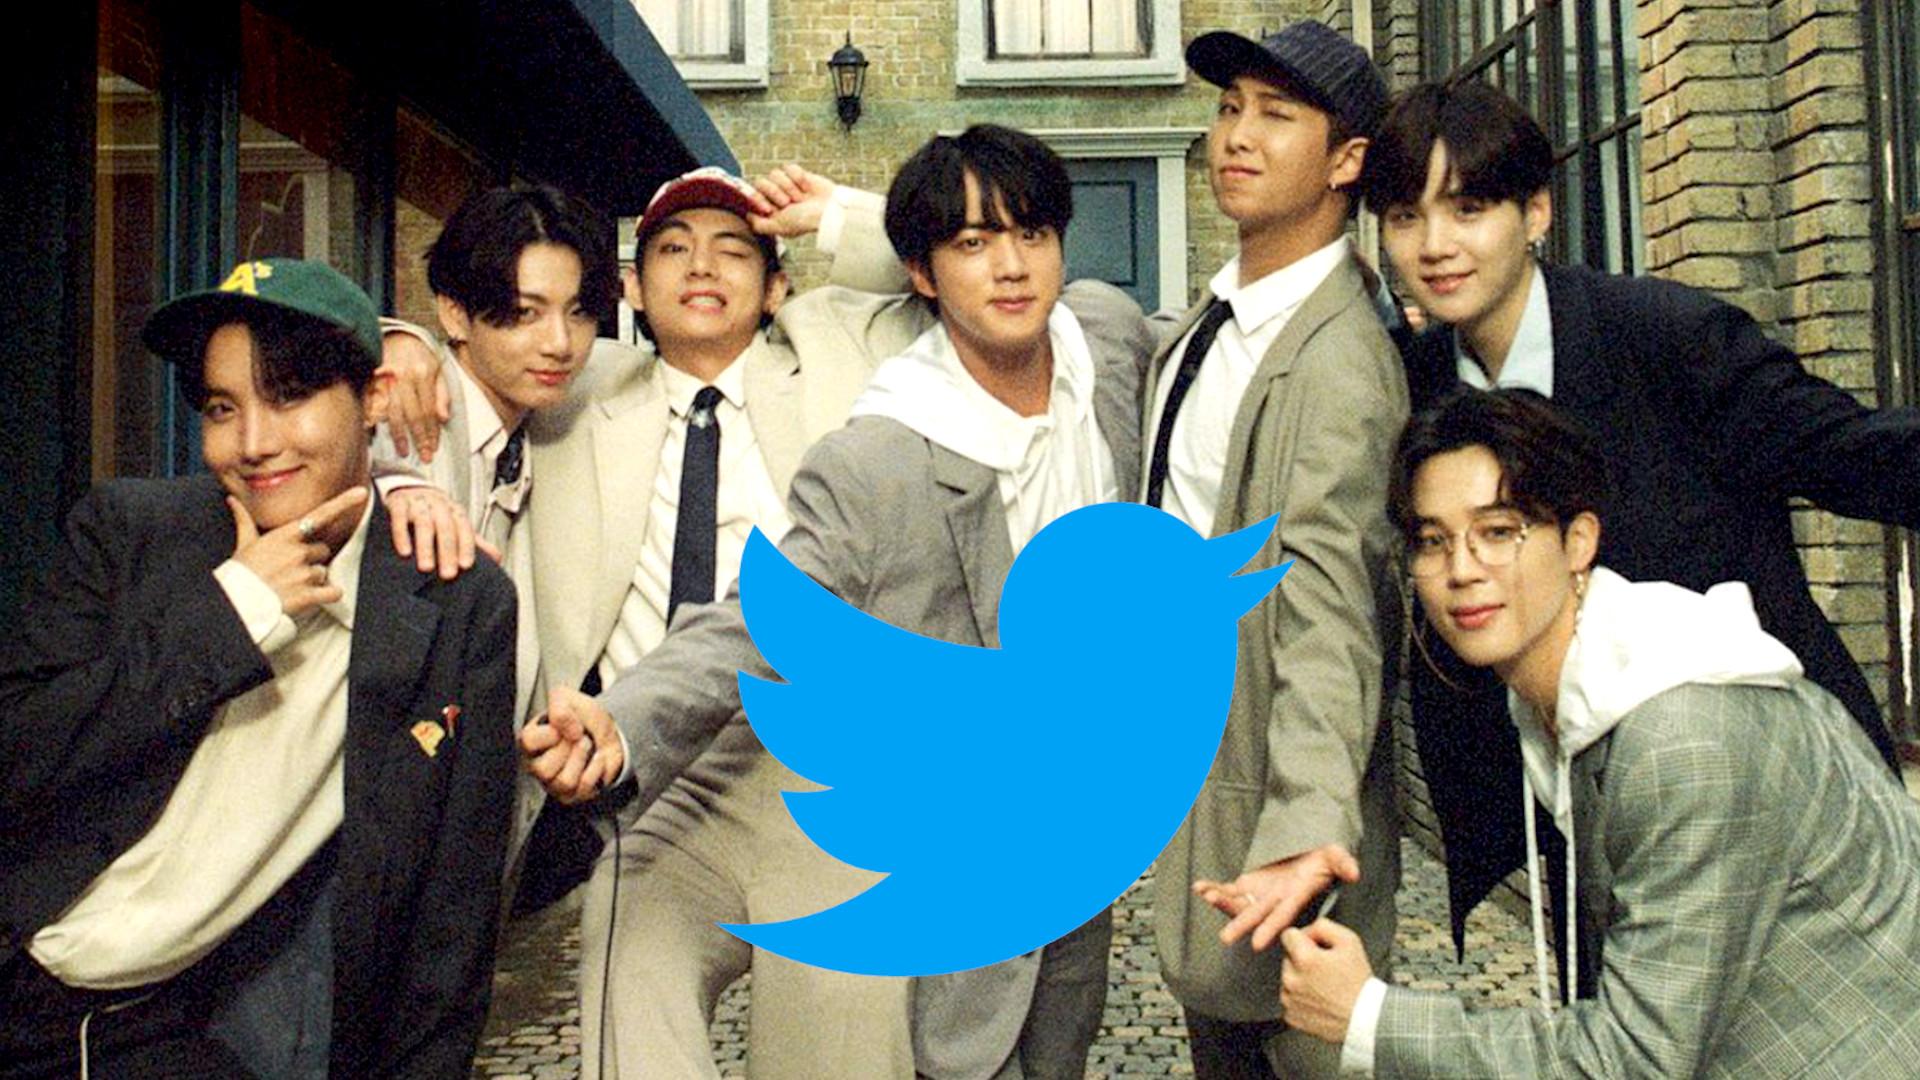 K-Pop band BTS becomes one of first accounts followed by Twitter